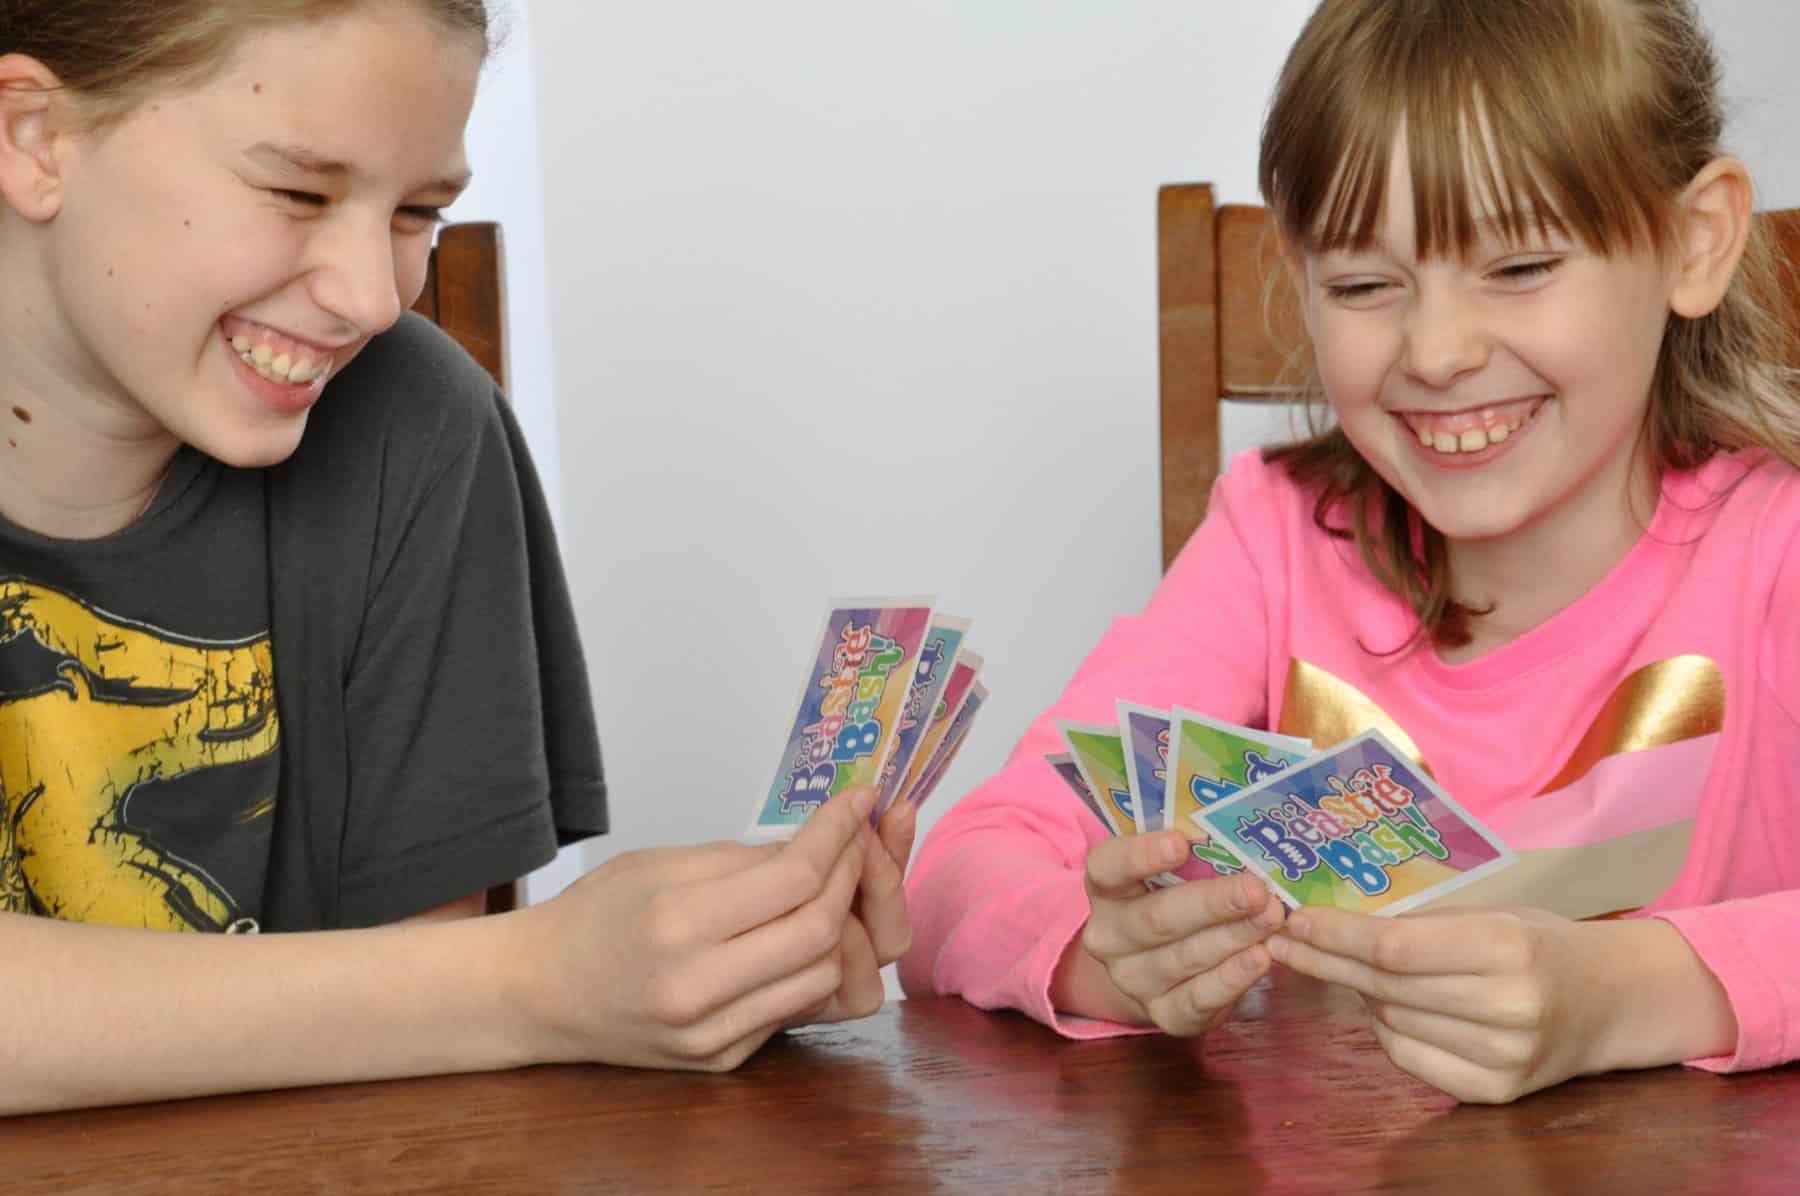 Buy Called It!  The funniest card game for 5 year olds & up